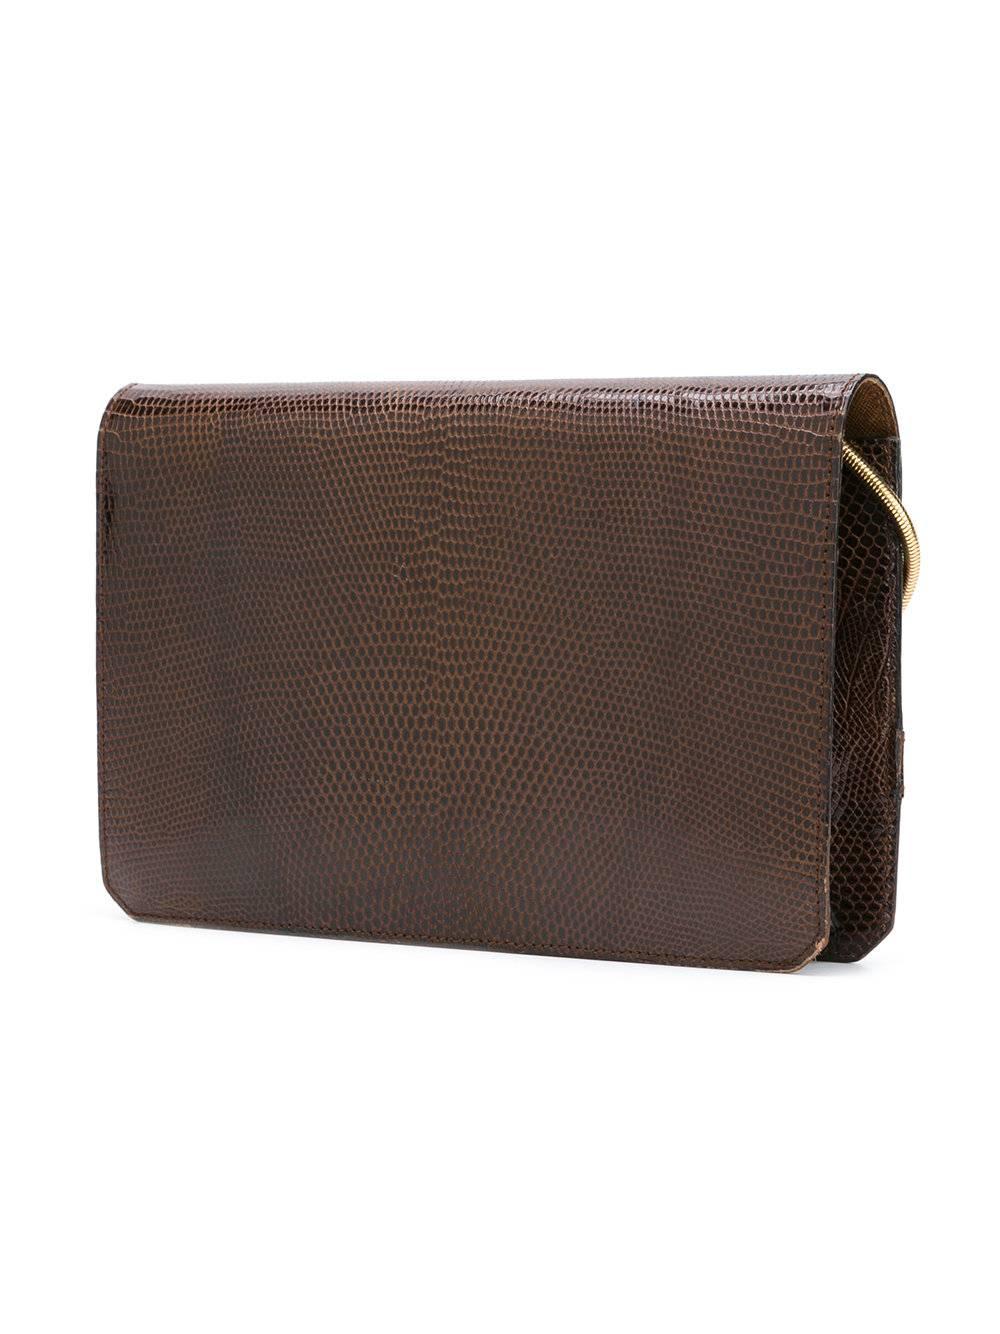 The french chic and elegance with this clutch/bag of the 70s made by Christian Dior. Brown lizard, gold hardware finishing. Snake shoulder strap. 
Marked: Christian Dior Paris
Size: 26 x 17 x 5 cm - 10 1/4 x 6.7 x 2 in. 
Excellent condition. 